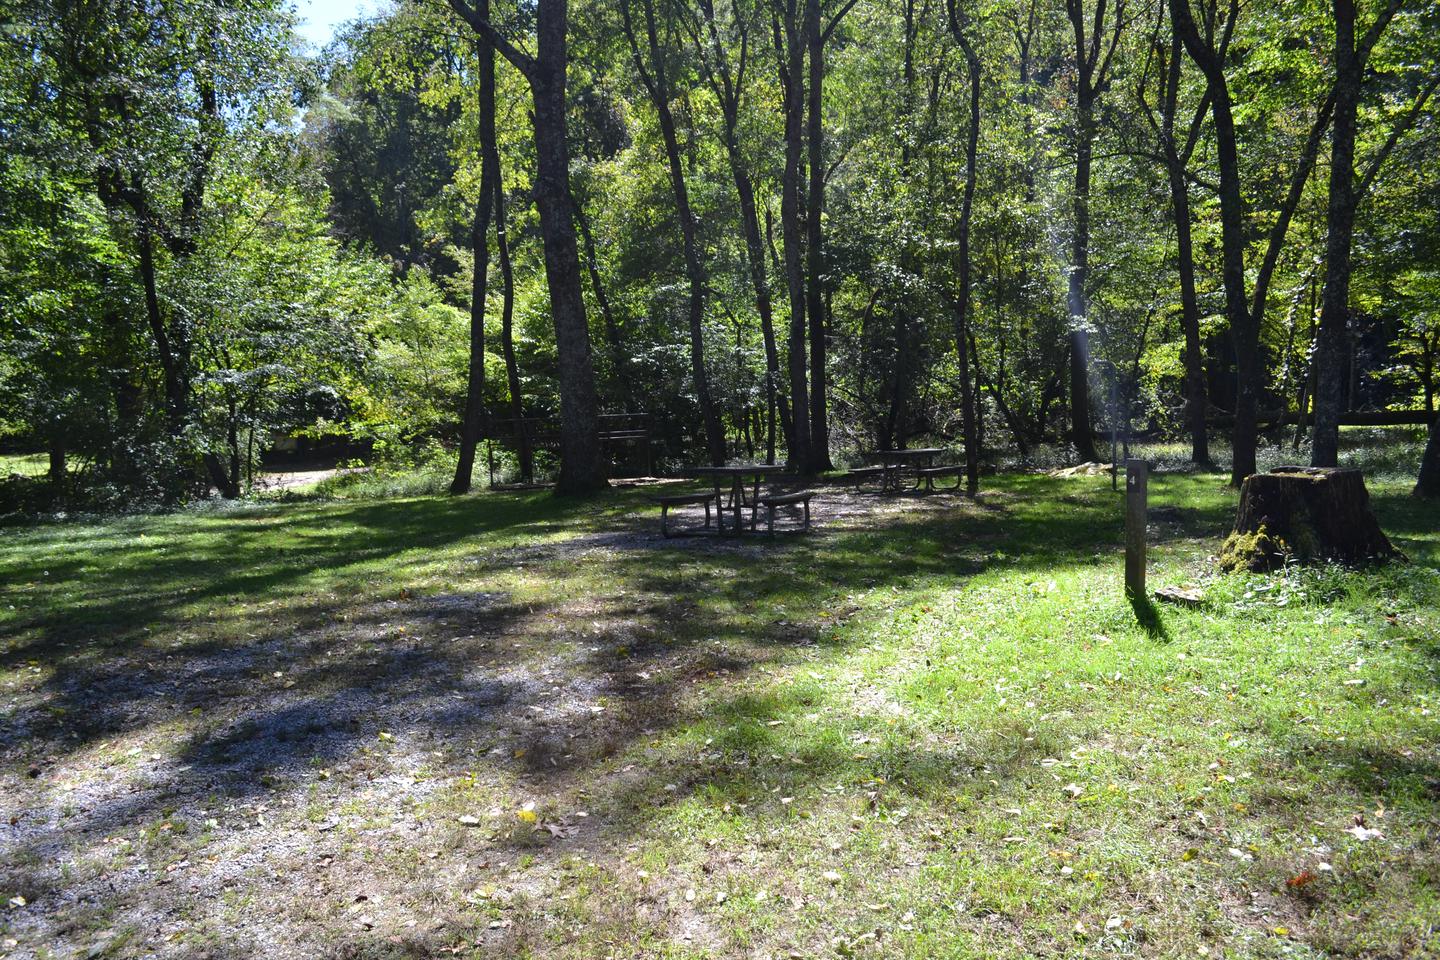 Cataloochee Horse Camp Site 4Campsite view from entry road showing parking area with picnic tables